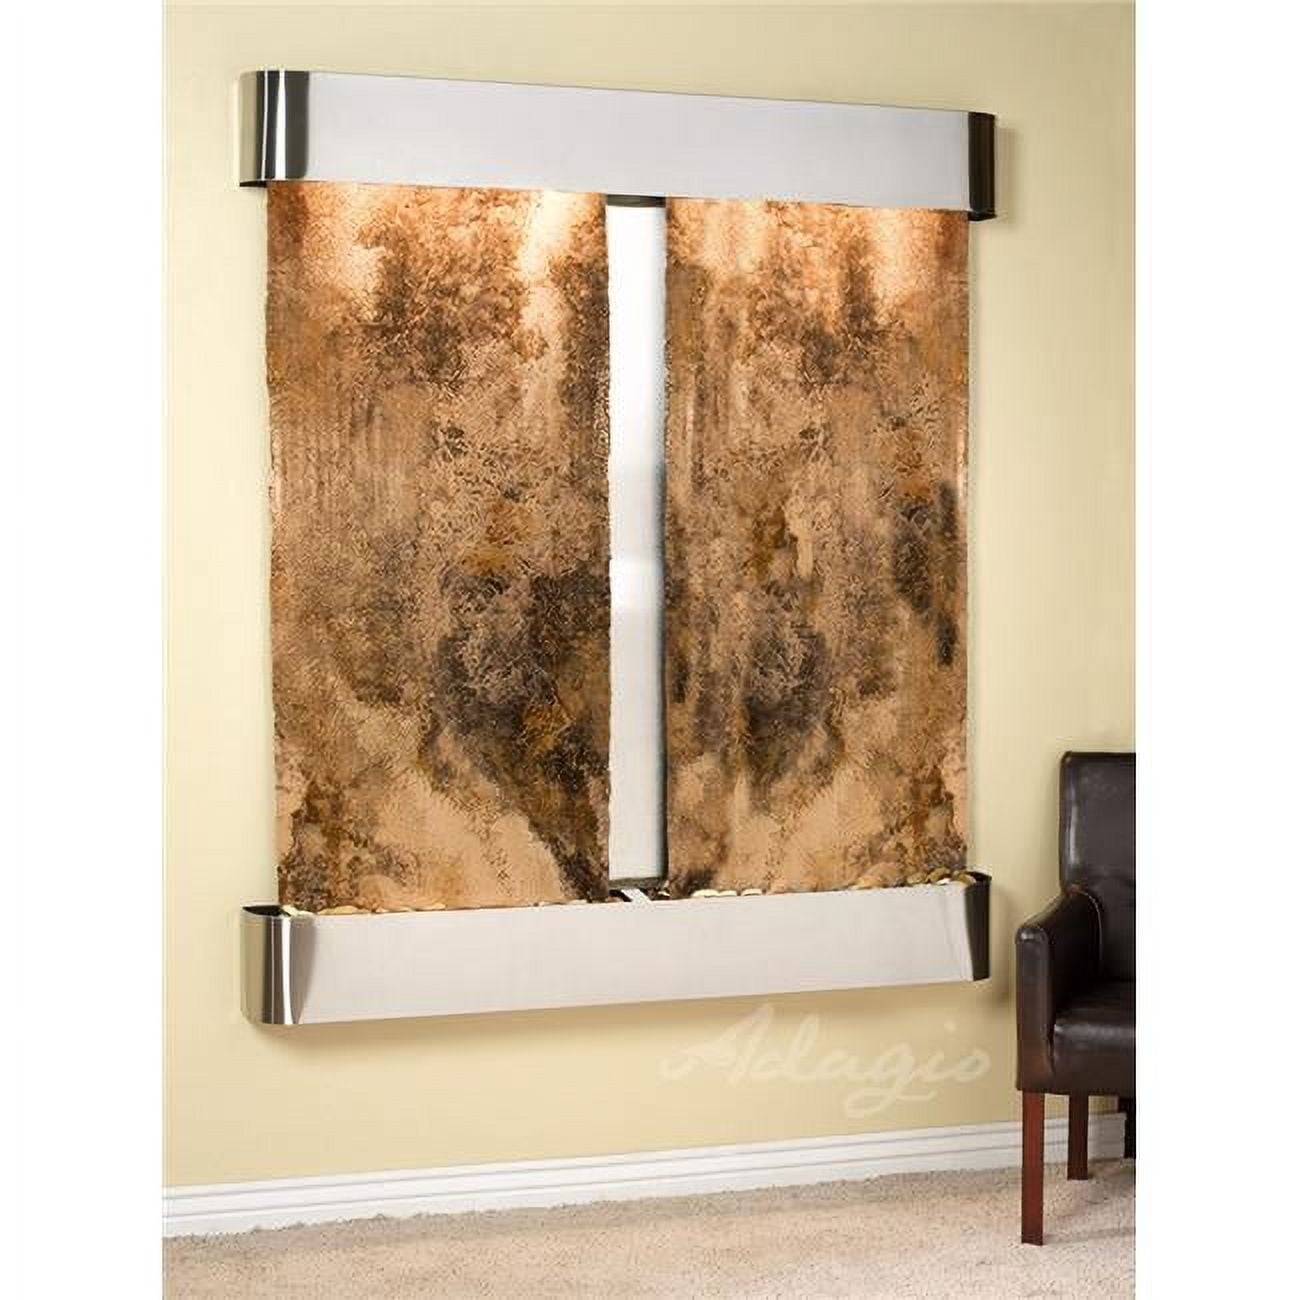 Picture of Adagio CFR2008 Cottonwood Falls Round Stainless Steel Magnifico Travertine Wall Fountain